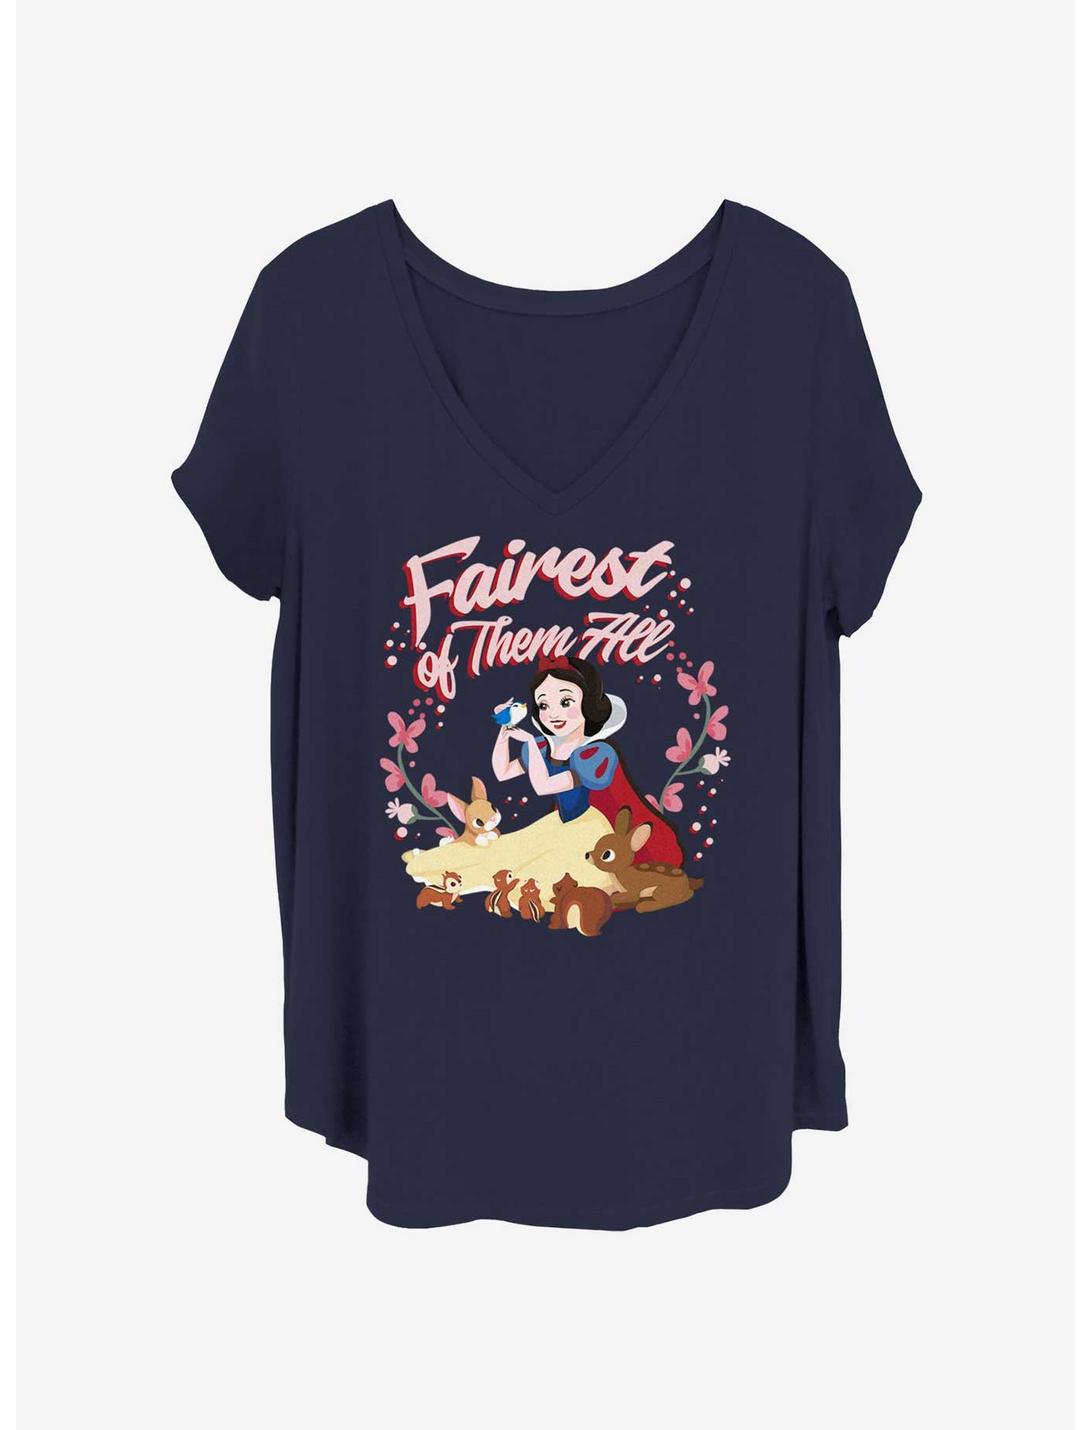 Disney Snow White and the Seven Dwarfs Fairest Of Them All Girls T-Shirt Plus Size, NAVY, hi-res